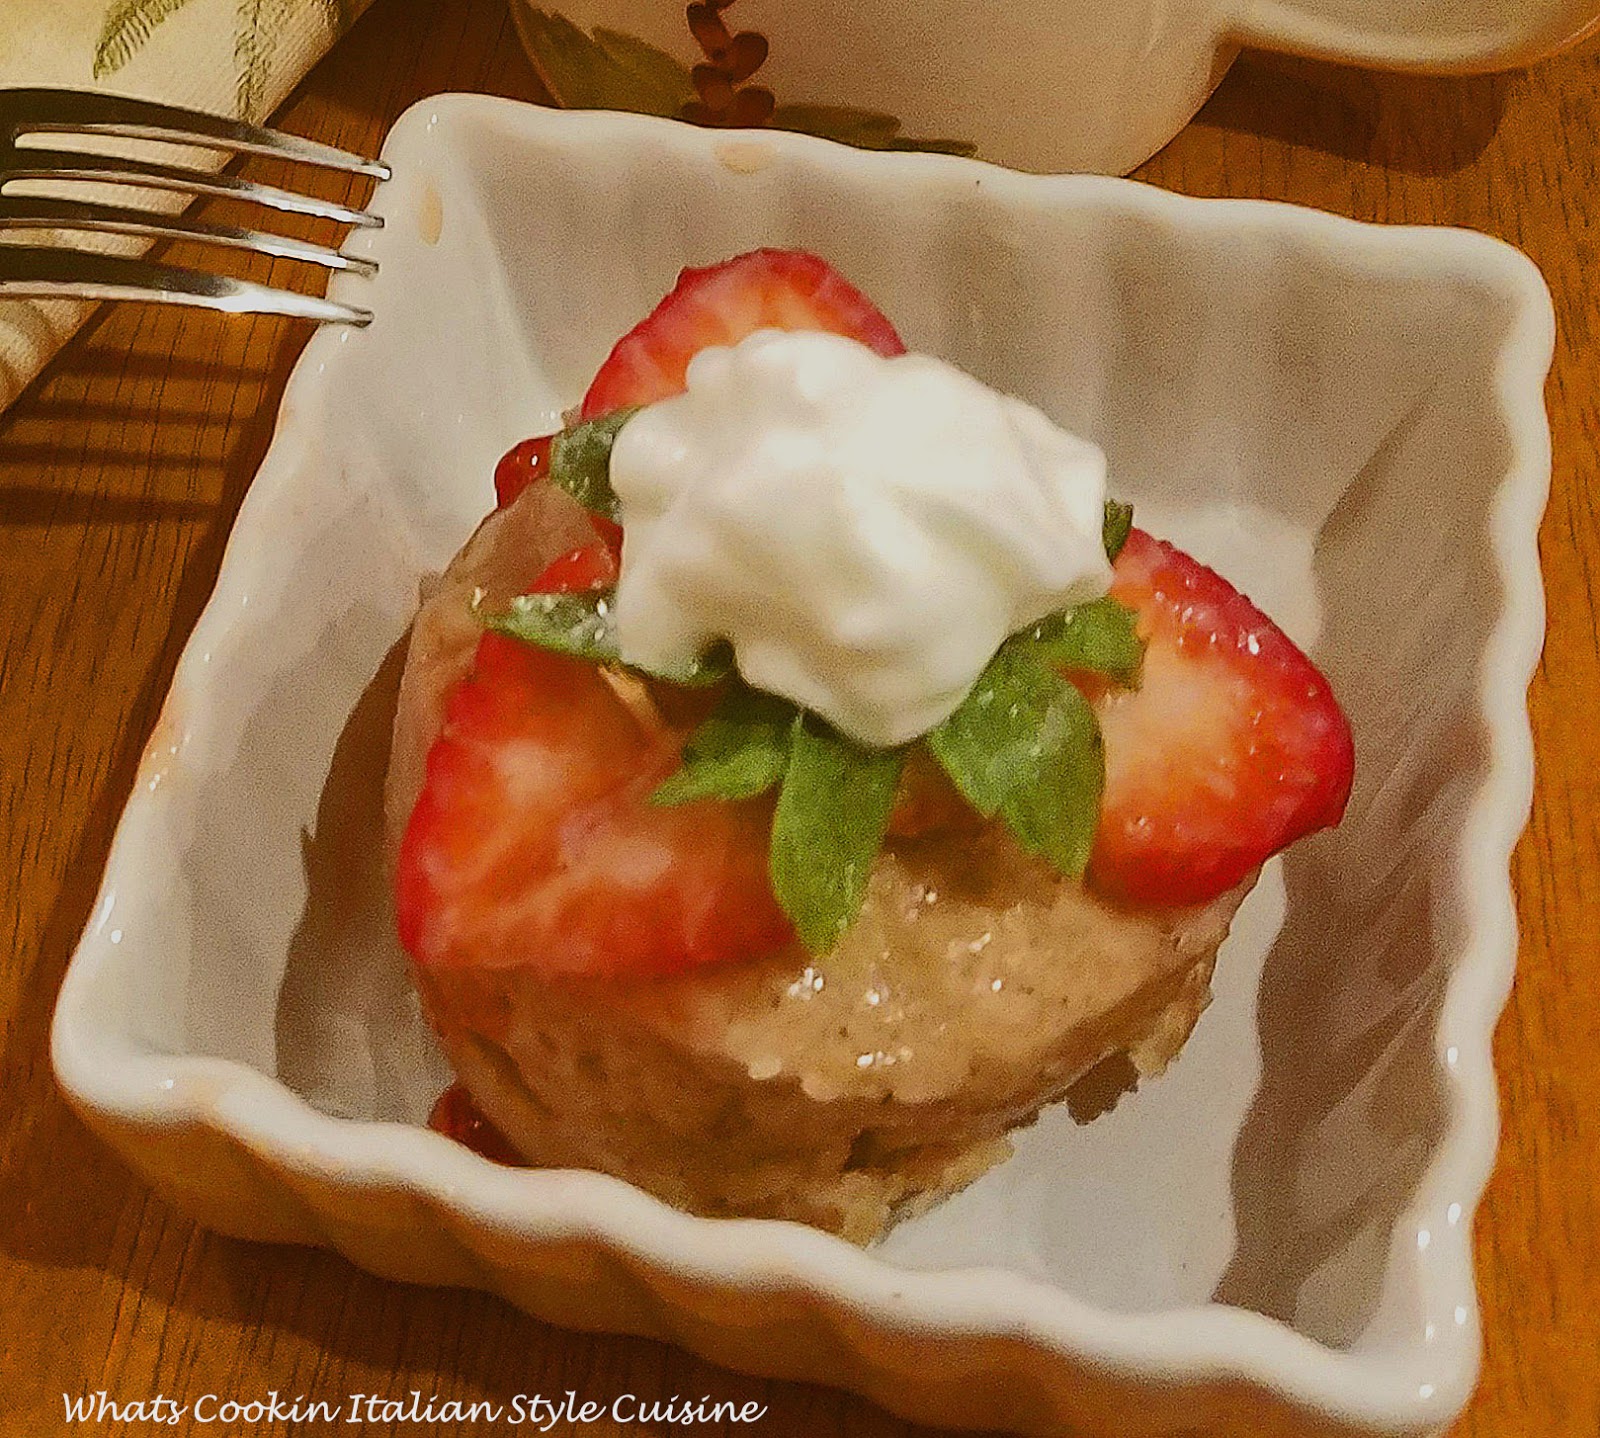 Applesauce mug cake stays moist and with strawberries on top makes it the best shortcake in minutes